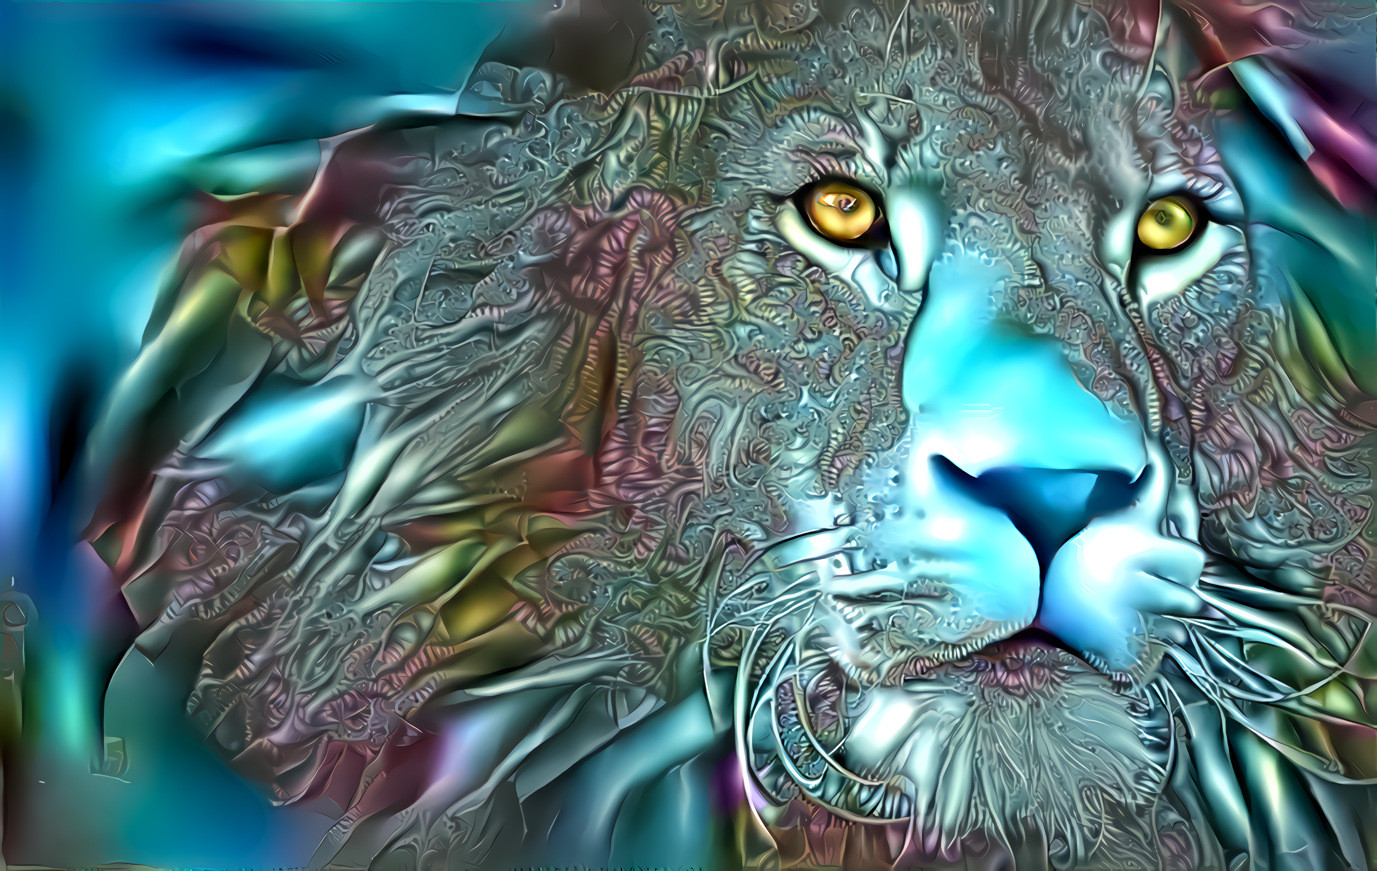 Leo (Image by Randy Rodriguez from Pixabay)